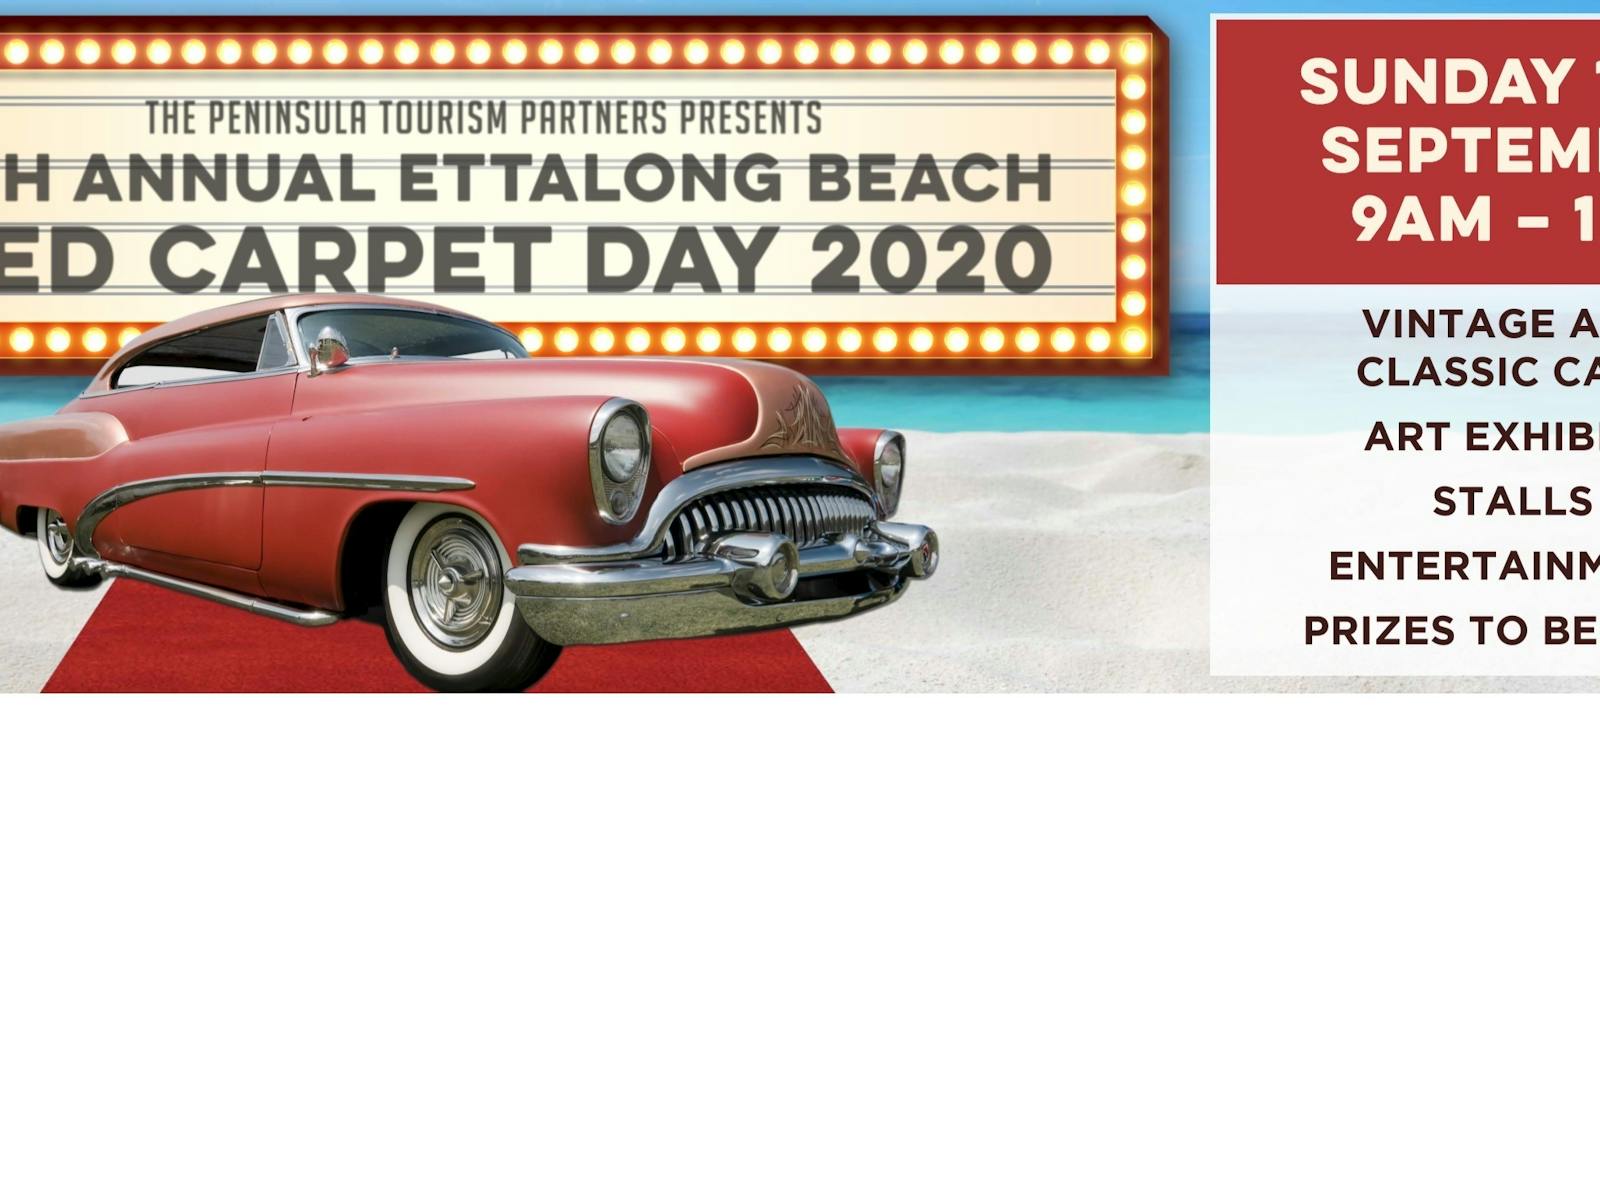 Image for Fifth Annual Red Carpet Day - Ettalong Beach